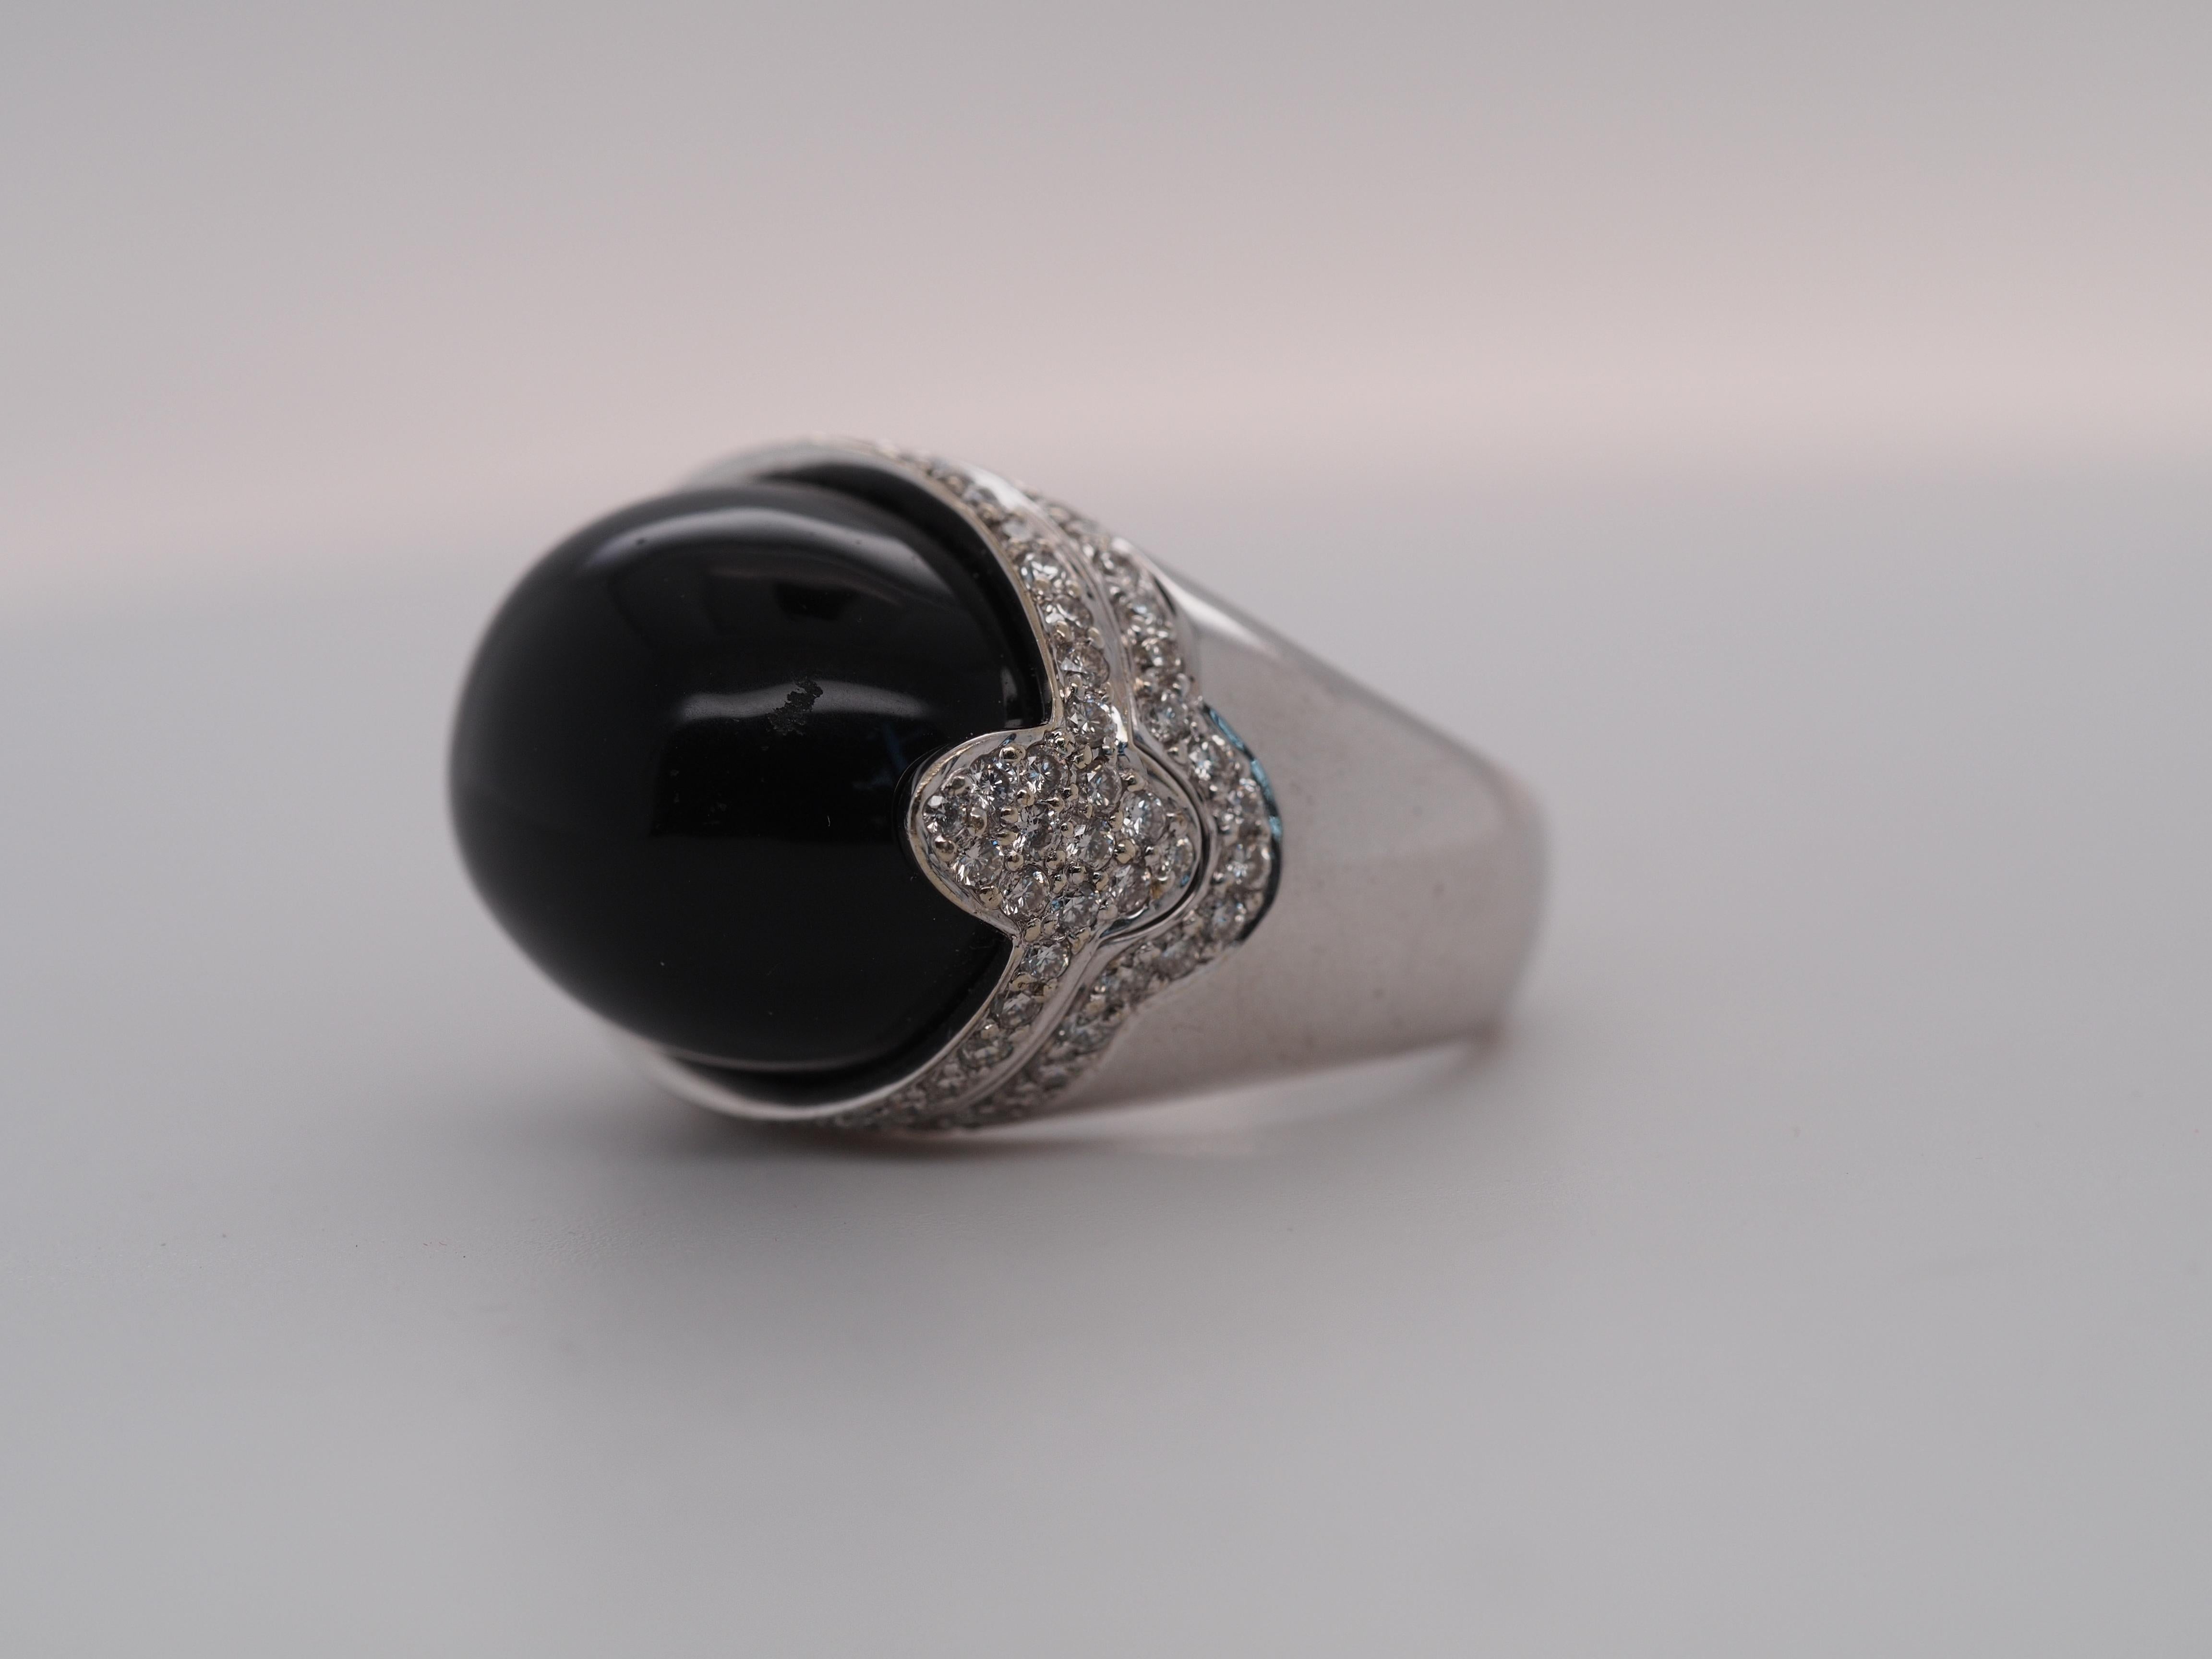 Year: 2000s
Item Details:
Ring Size: 6.75
Metal Type: 14k White Gold [Hallmarked, and Tested]
Weight: 17.4 grams
Diamond Details: 1.25ct total weight, F-G Color, VS Clarity, Round Brilliant, Natural Diamonds.
Band Width: 5.7mm
Condition: Excellent